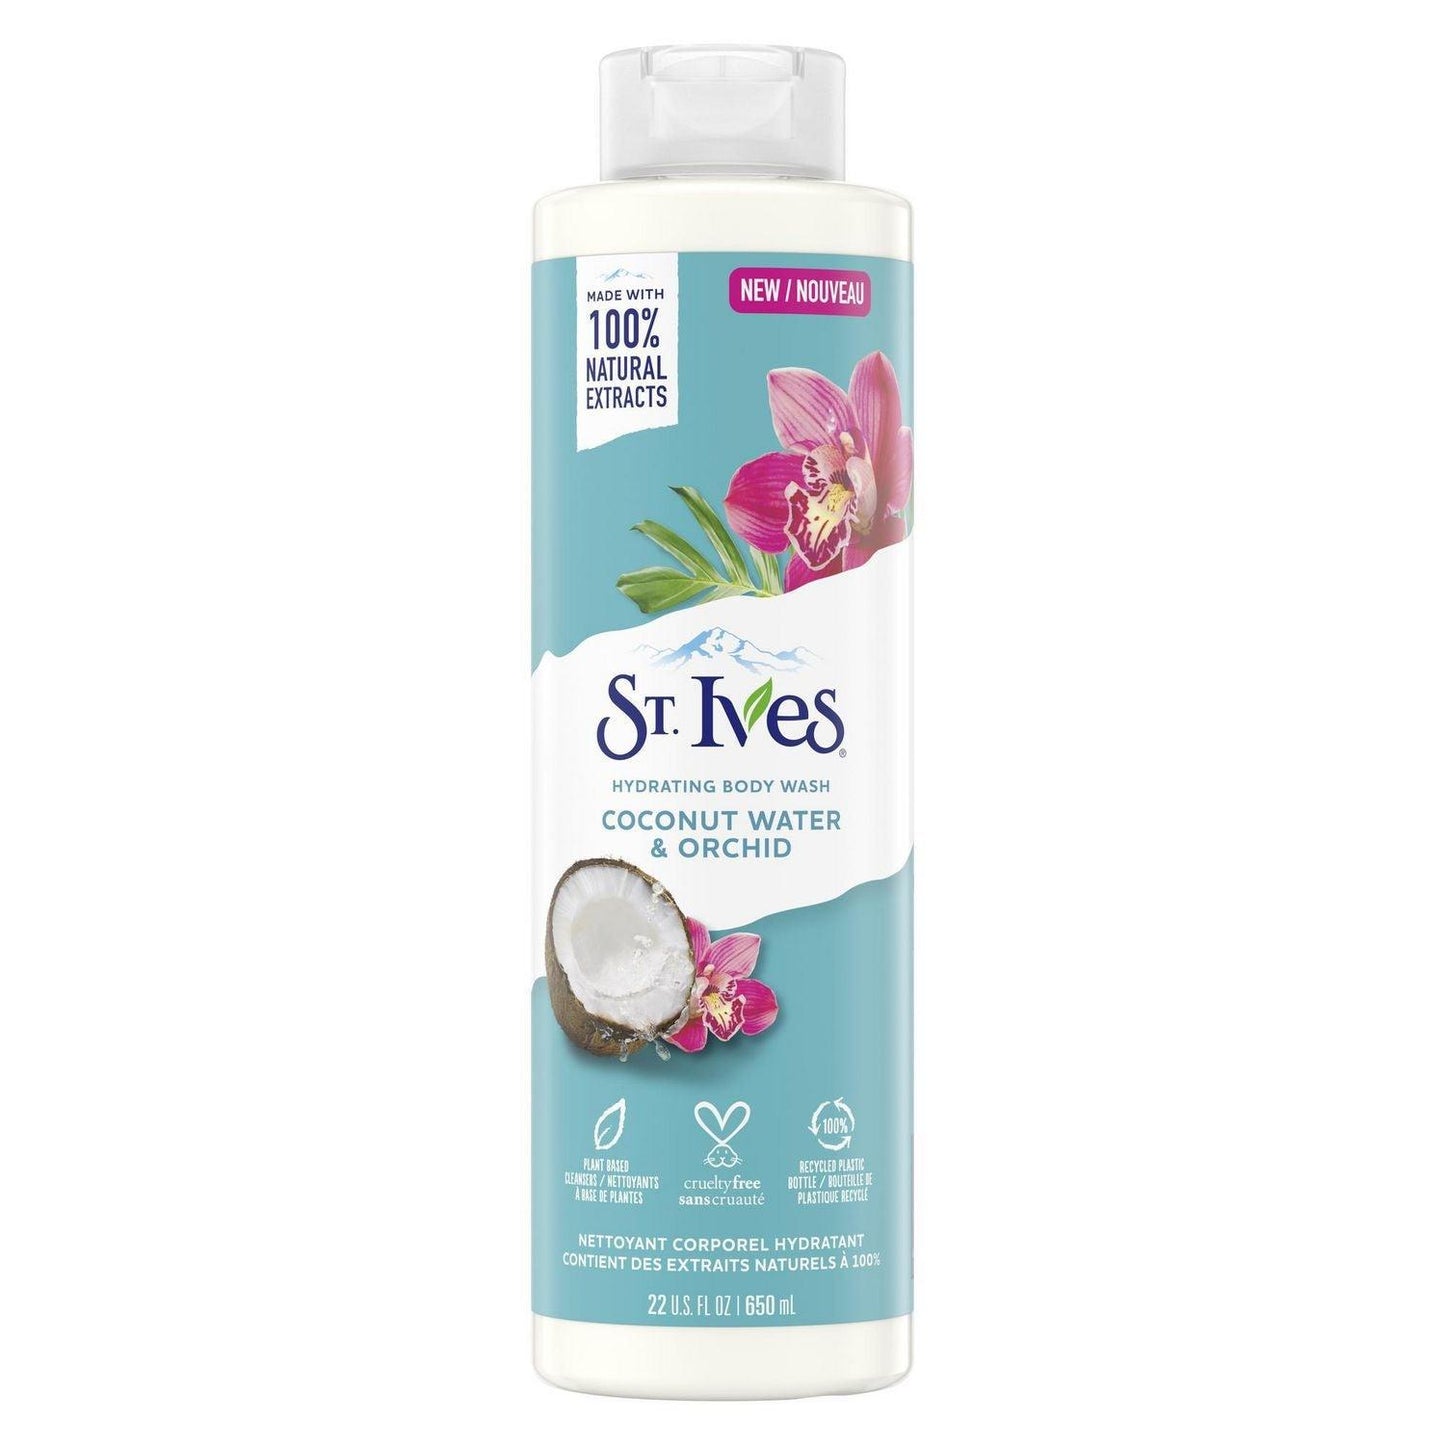 ST.IVES HYDRATING BODY WASH COCONUT WATER AND ORCHID 650 ML - Beauty Bounty